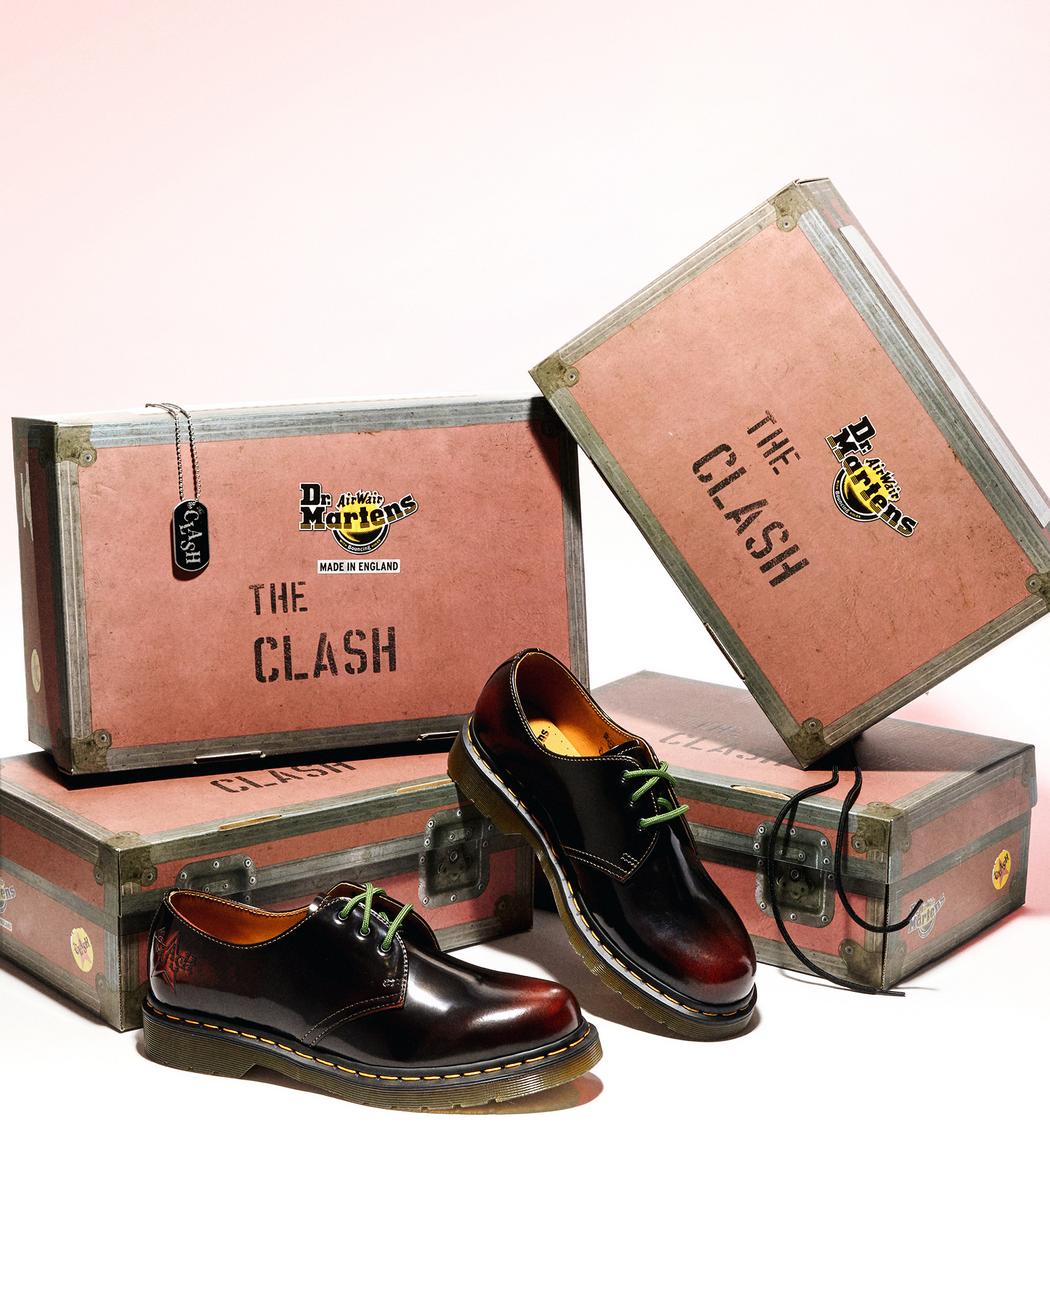 Dr. Martens 1461 The Clash Arcadia Cherry Red